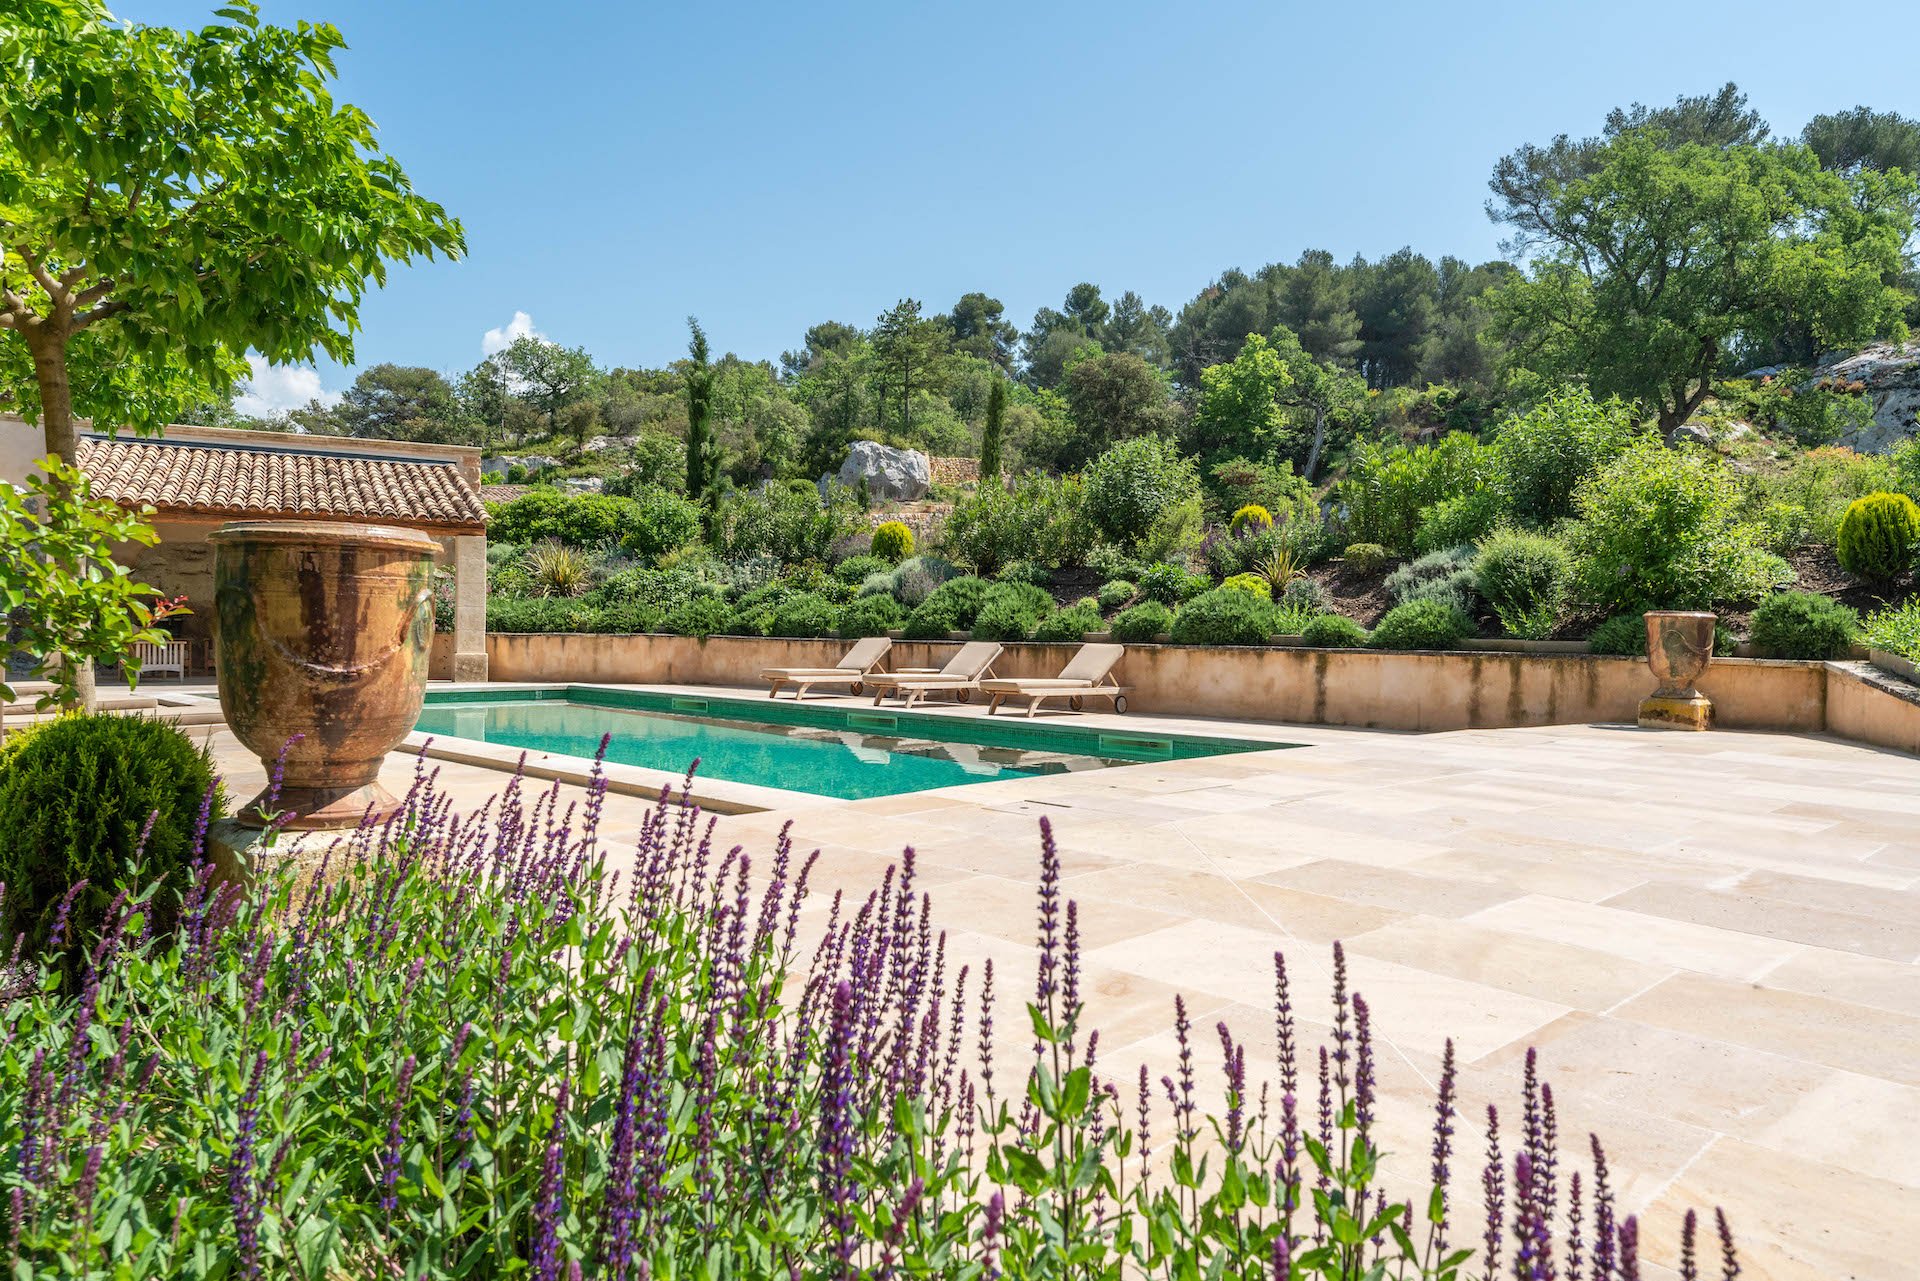 Prestigious estate in Provence, to organize your company seminar between work sessions and relaxation activities.